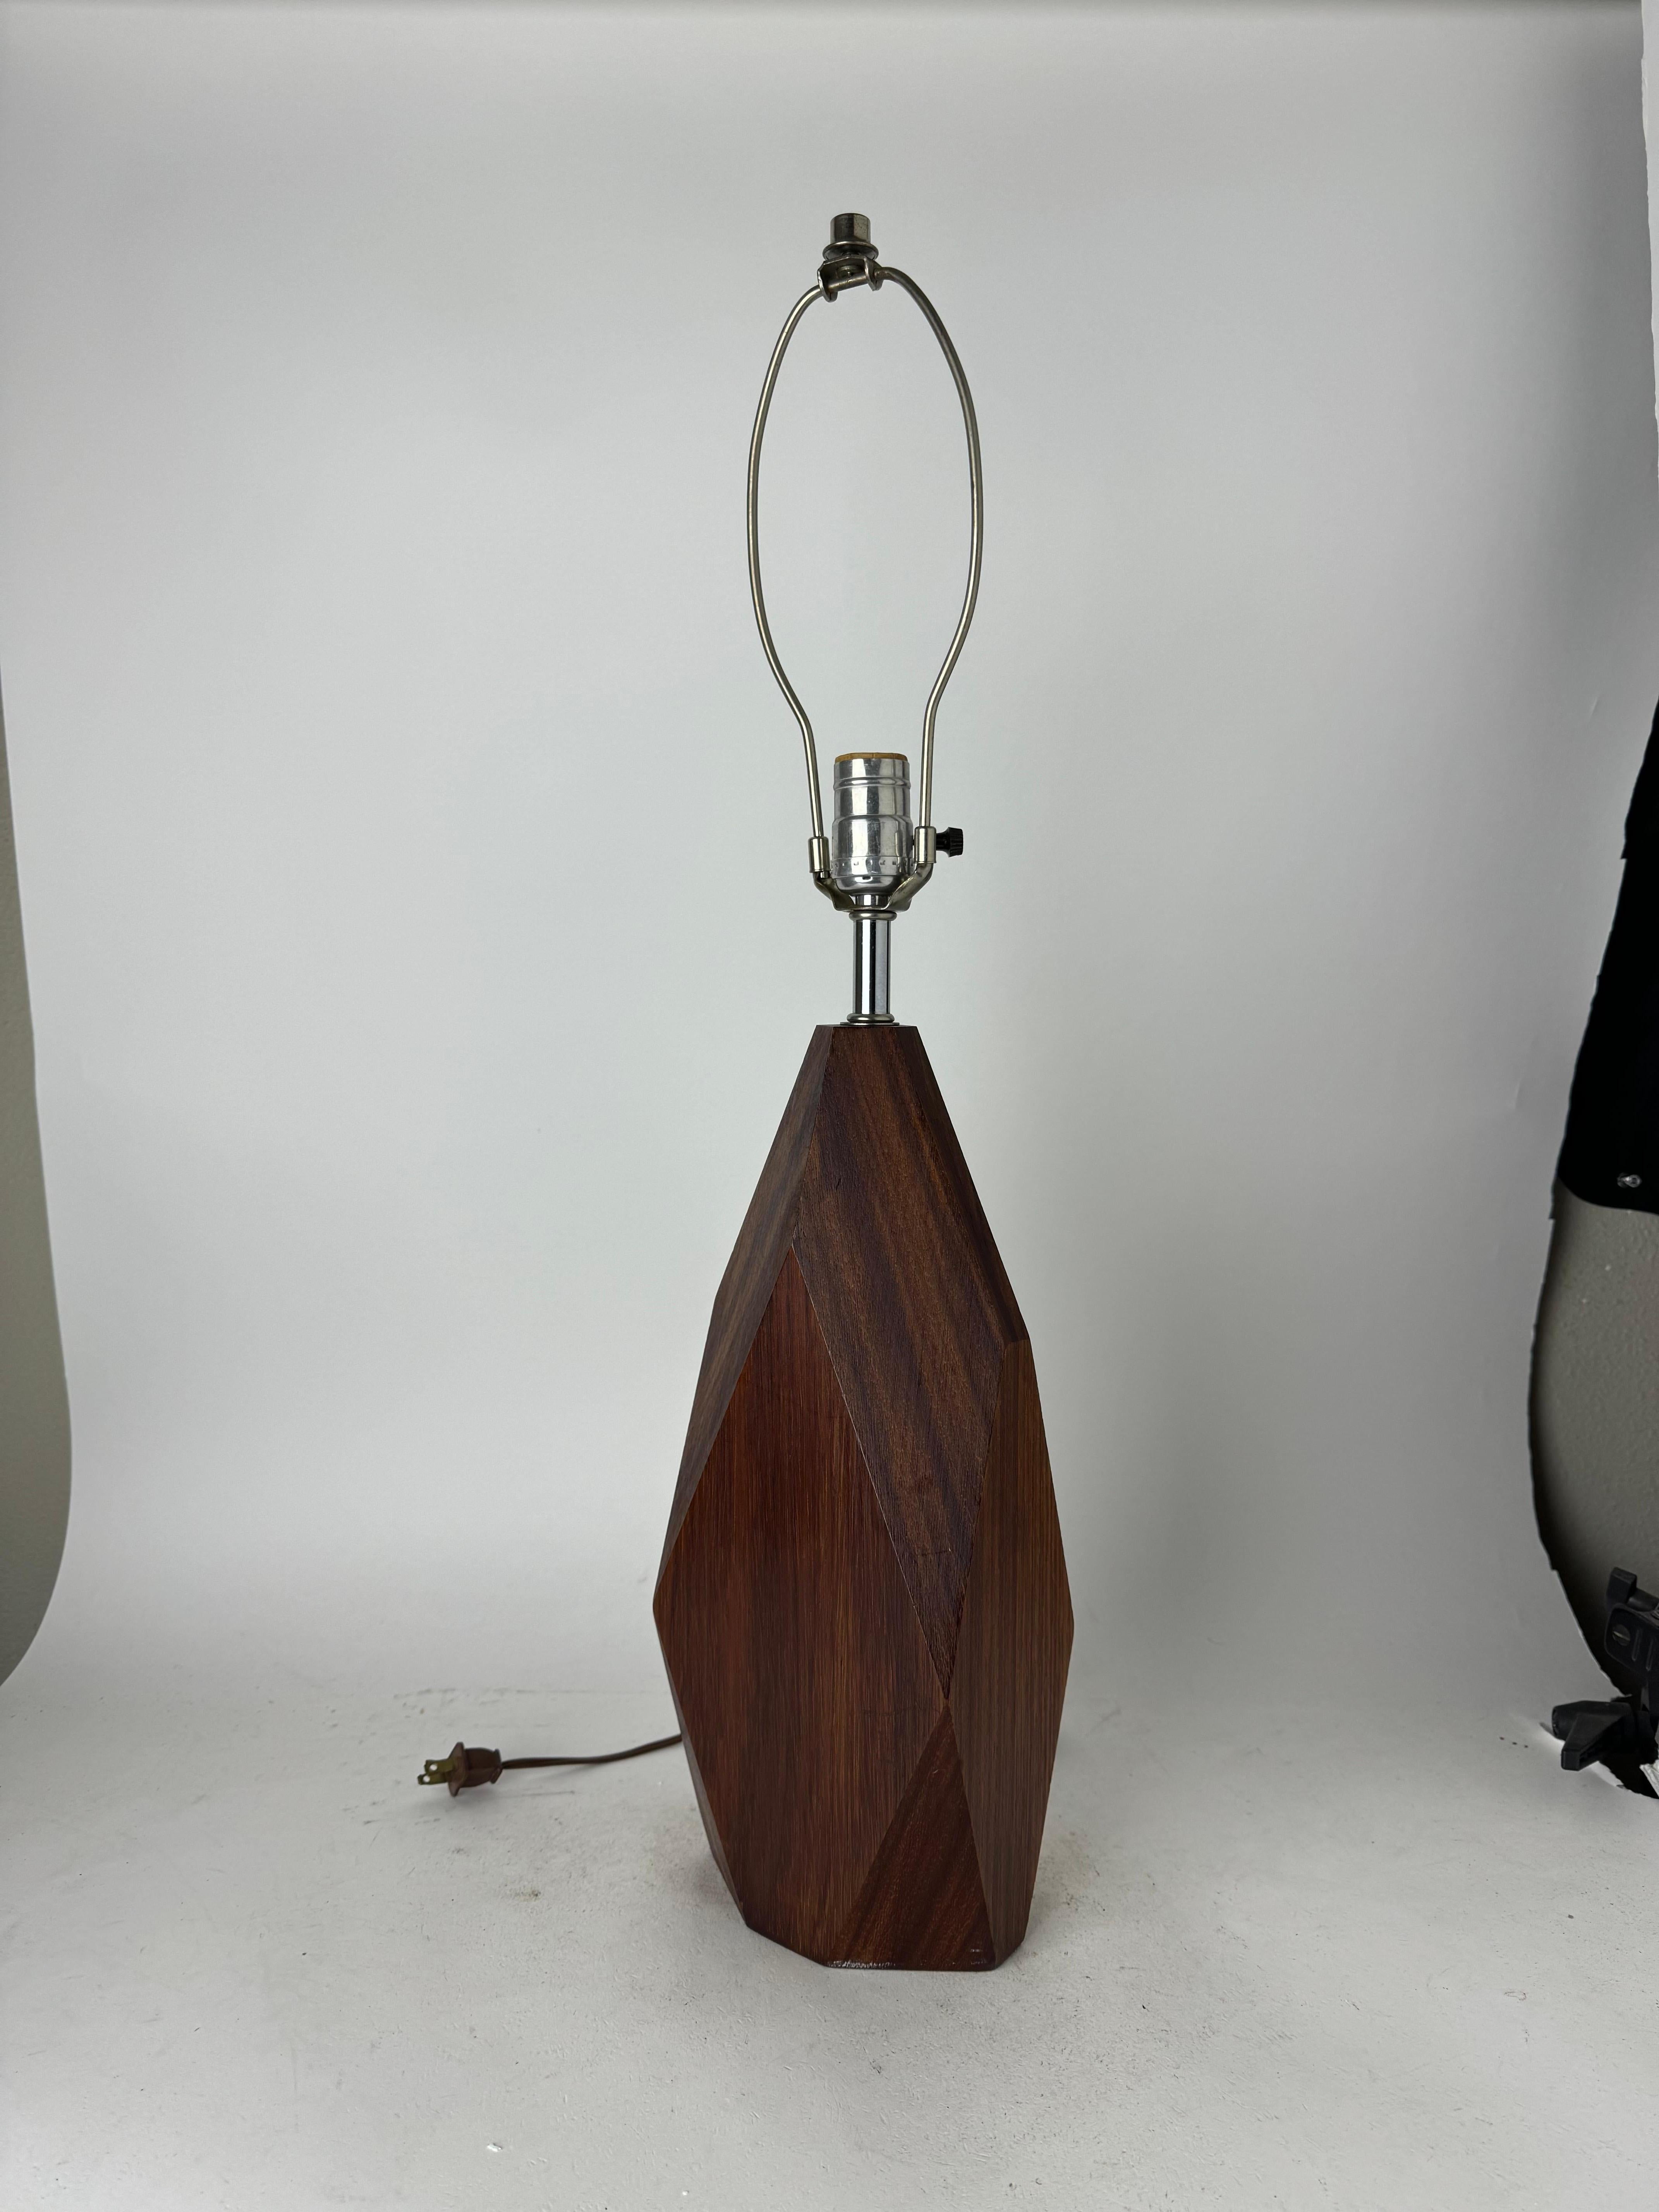 Gorgeous vintage diamond shaped table lamp in teak wood, after the finest Danish Mid Century Modern designs. This mid century modern table lamp comes without a shade. 

There's no designer or maker marks on the lamp.

The teak wooden base stands 15